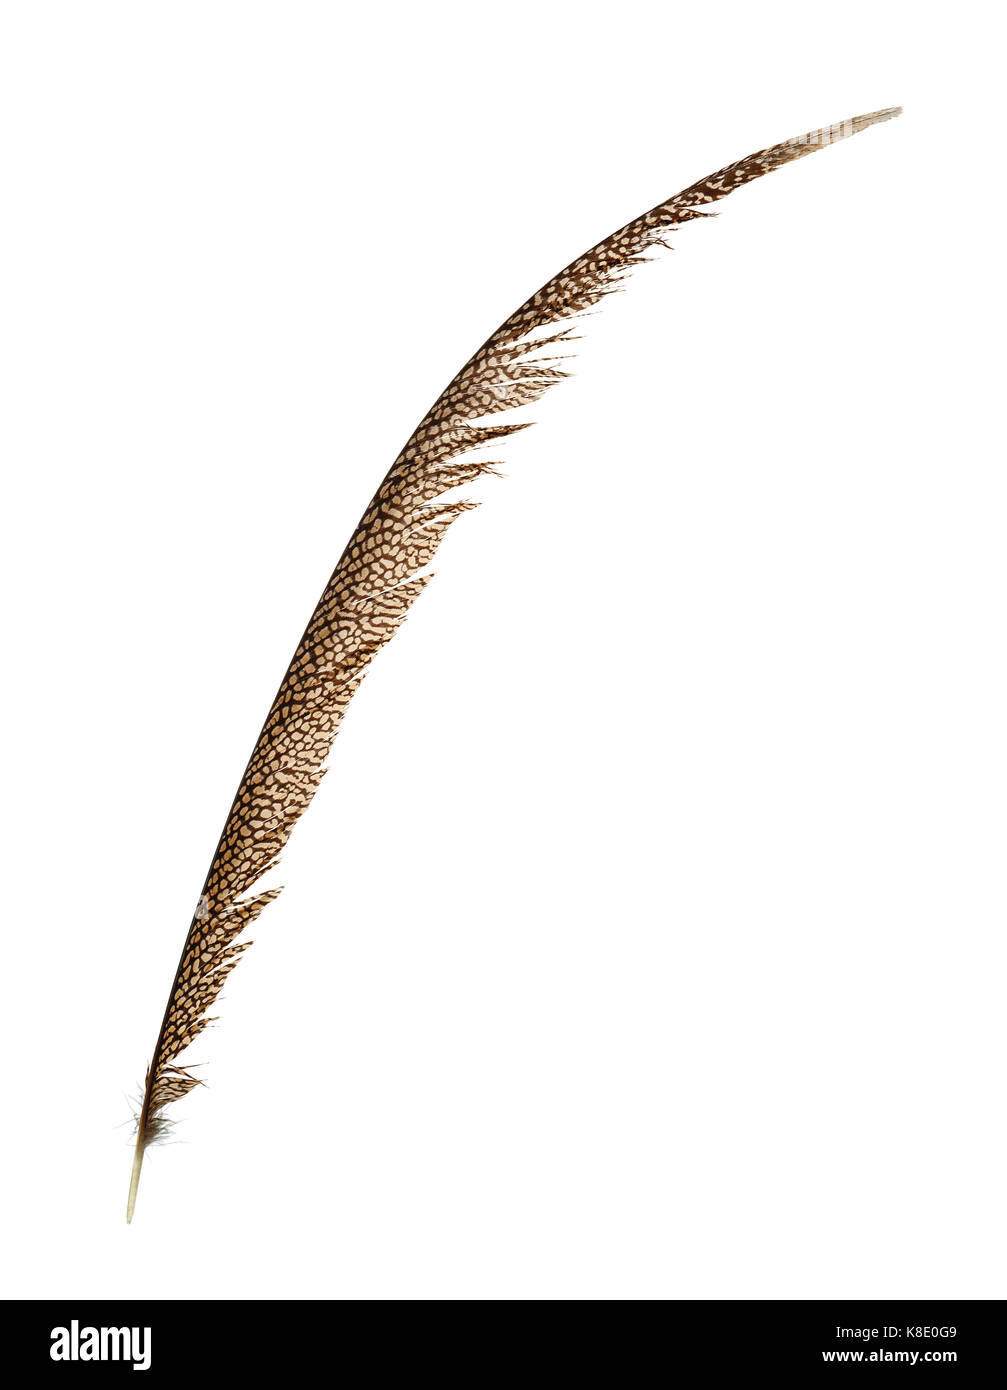 Pheasant tail feather isolated on white Banque D'Images